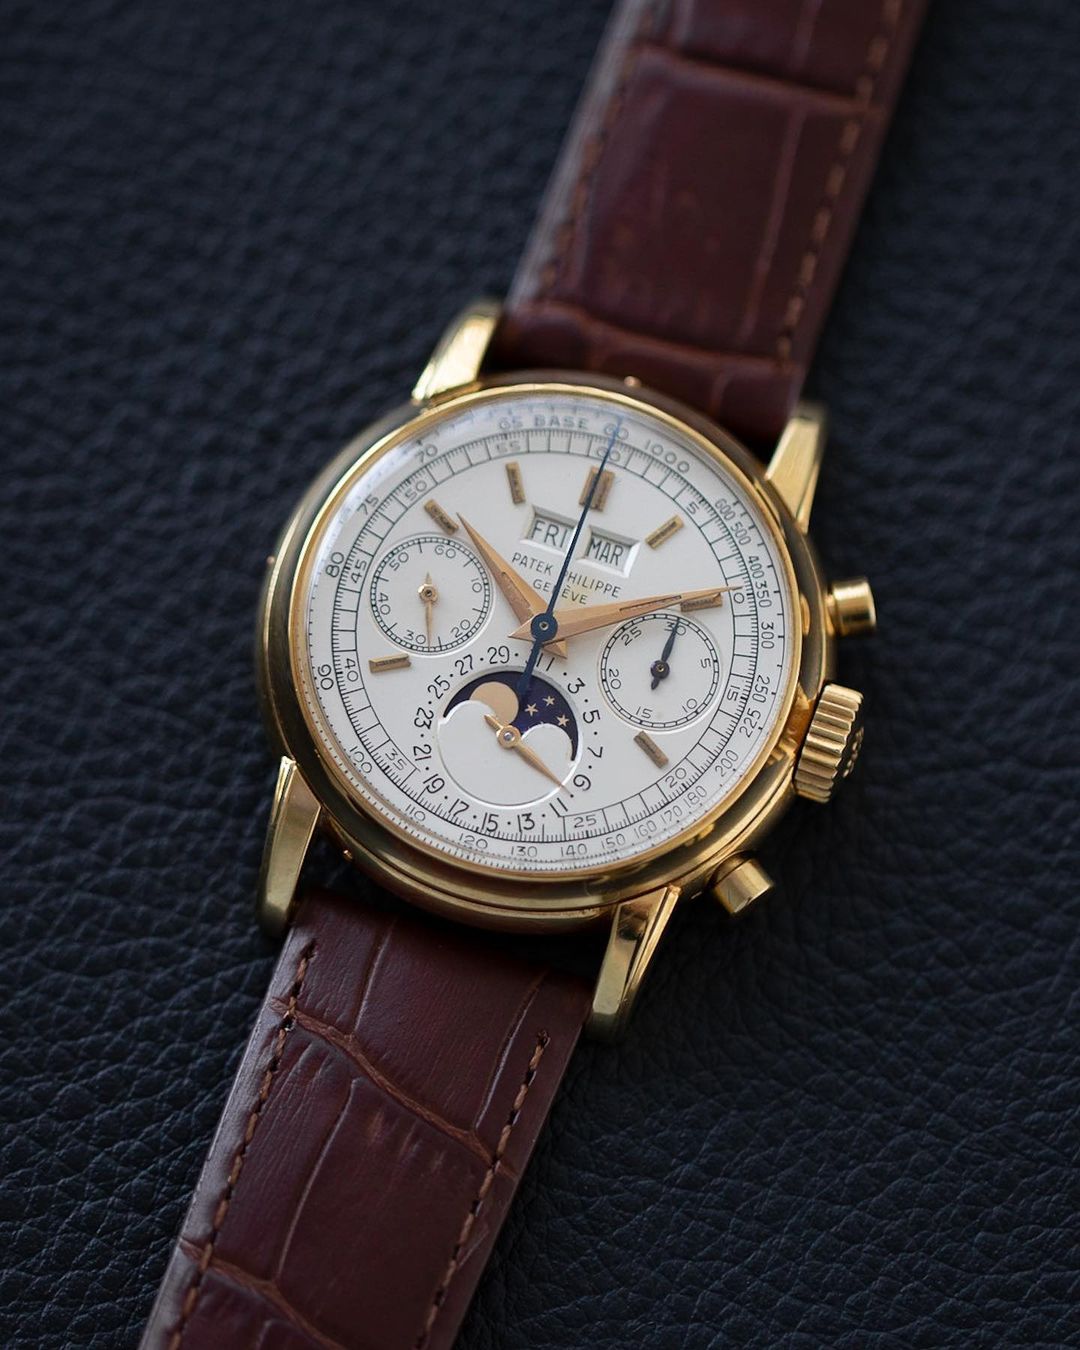 pre-owned Patek Philippe Ref. 2499 sold at the 2022 Sotheby's Hong Kong auction